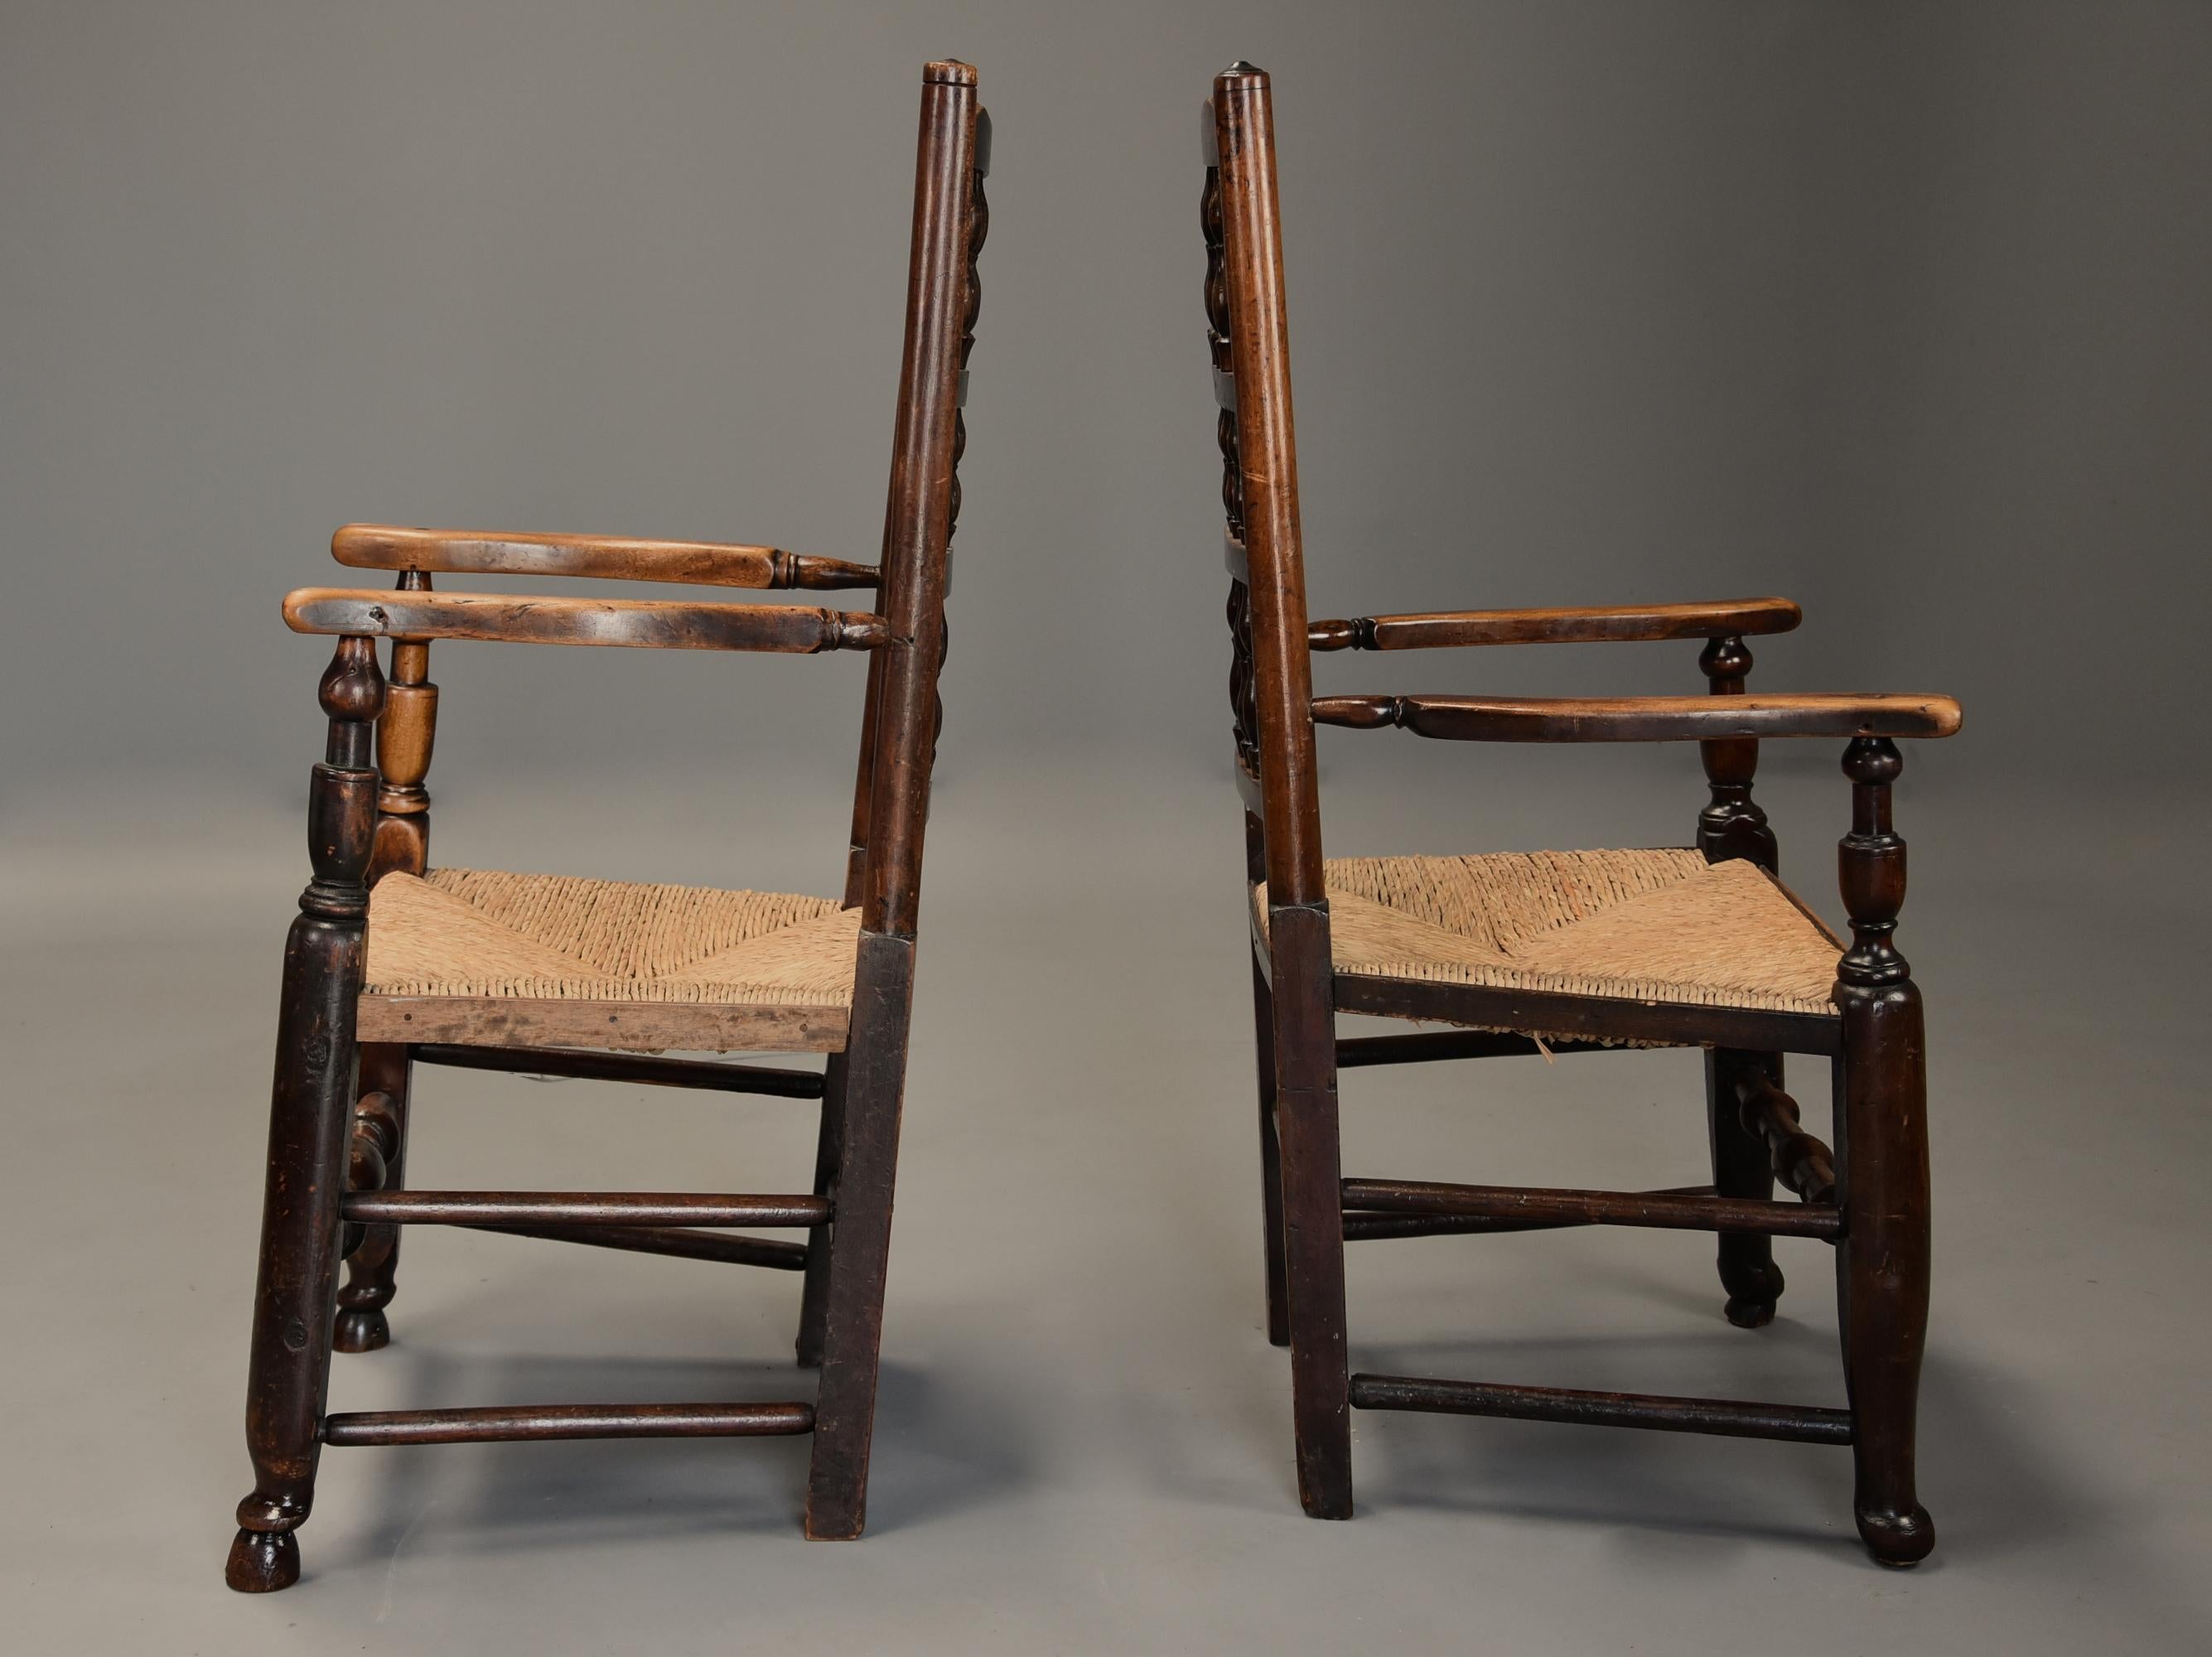 Matched Set of Eight Mid-19th Century Ash Spindle Back Chairs of Superb Patina For Sale 4